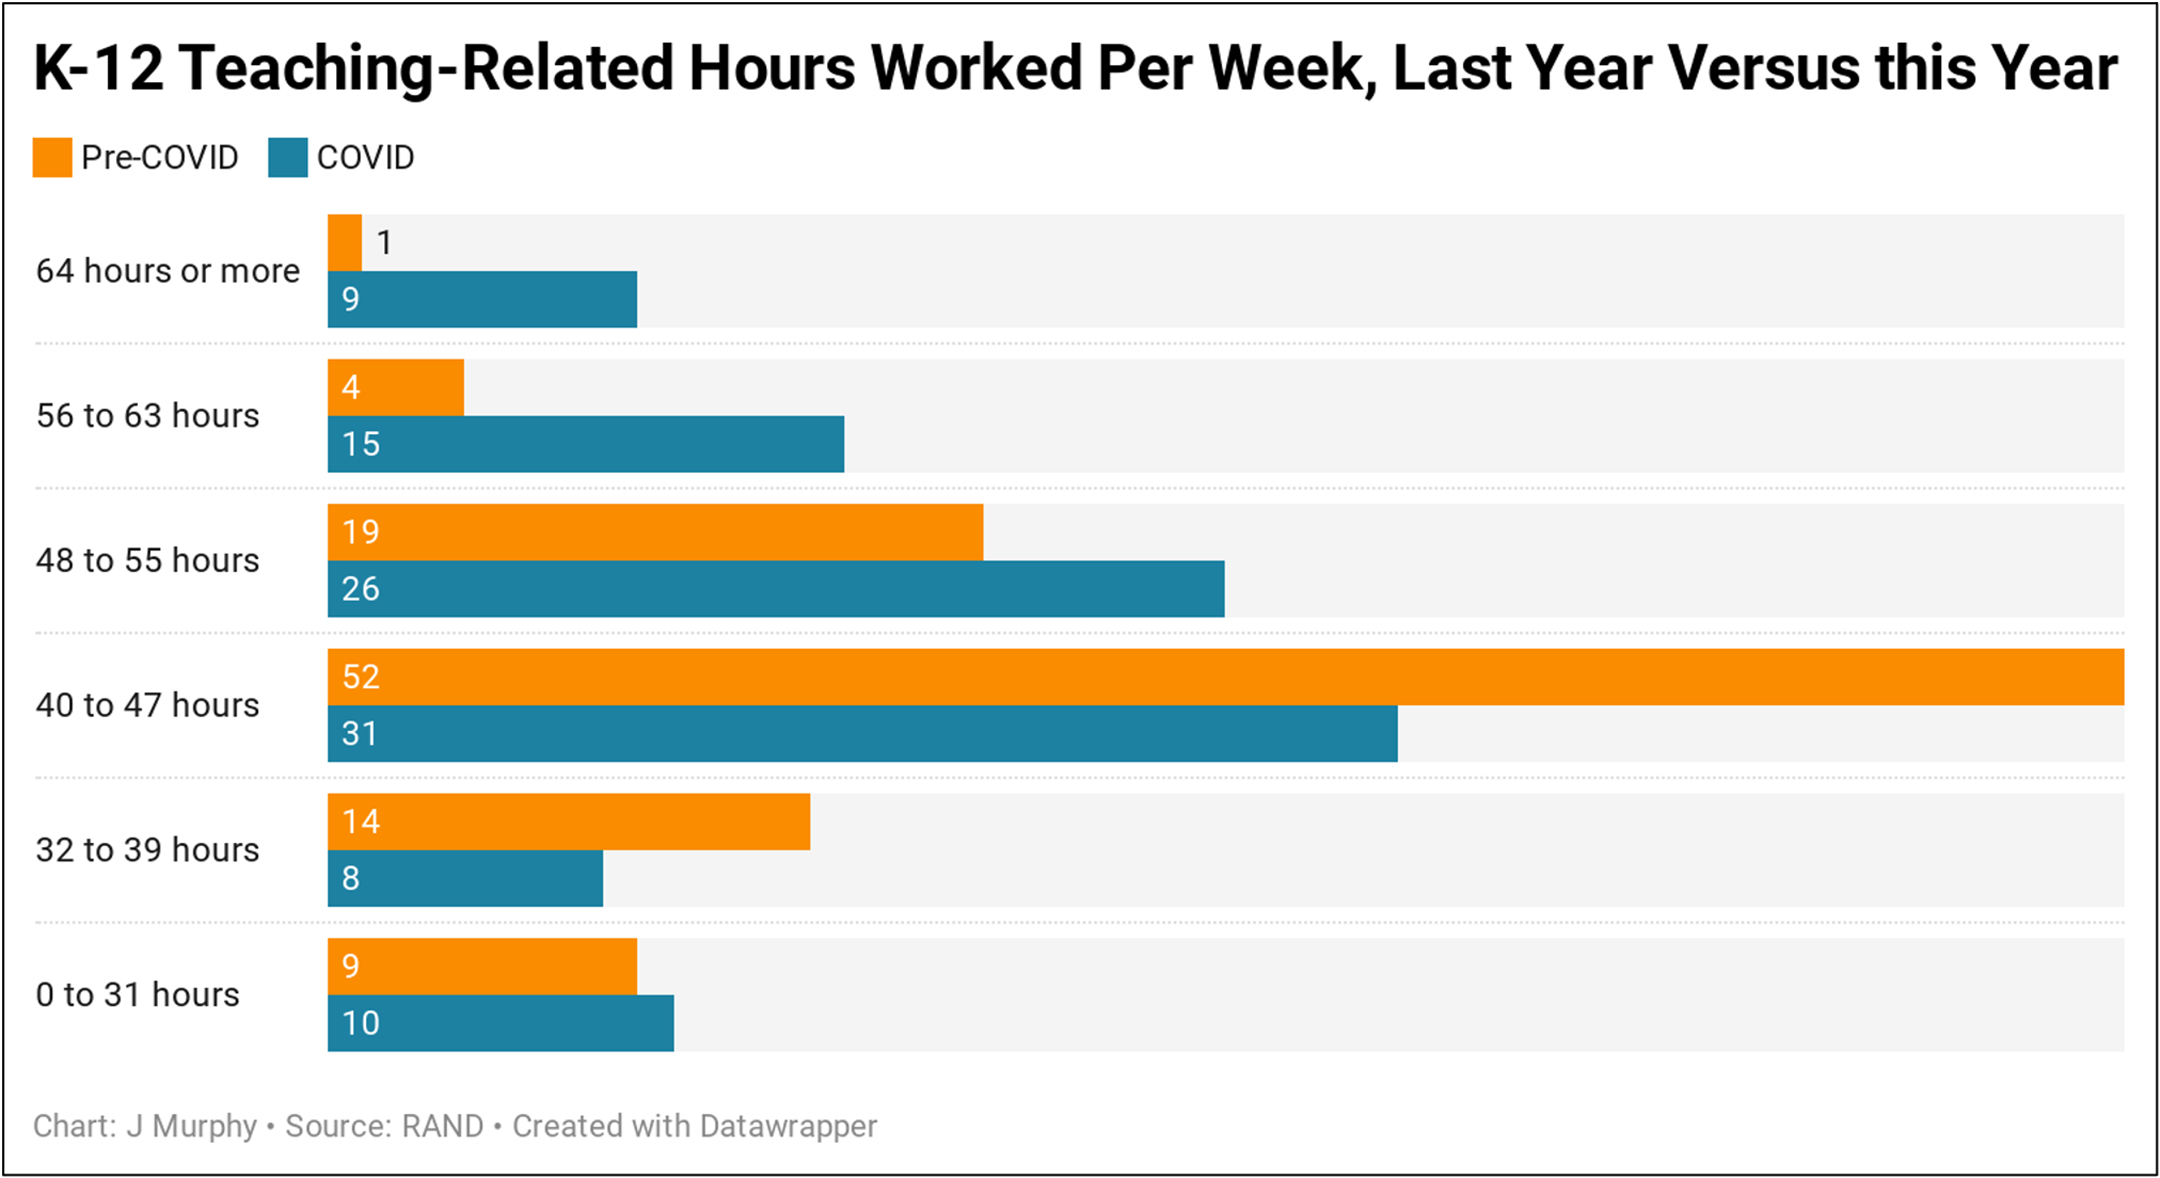 A bar chart, titled K-12 Teaching-Related Hours Worked Per Week, Last Year Versus This Year, shows data ranging from 0-31 hours to 64 hours or more